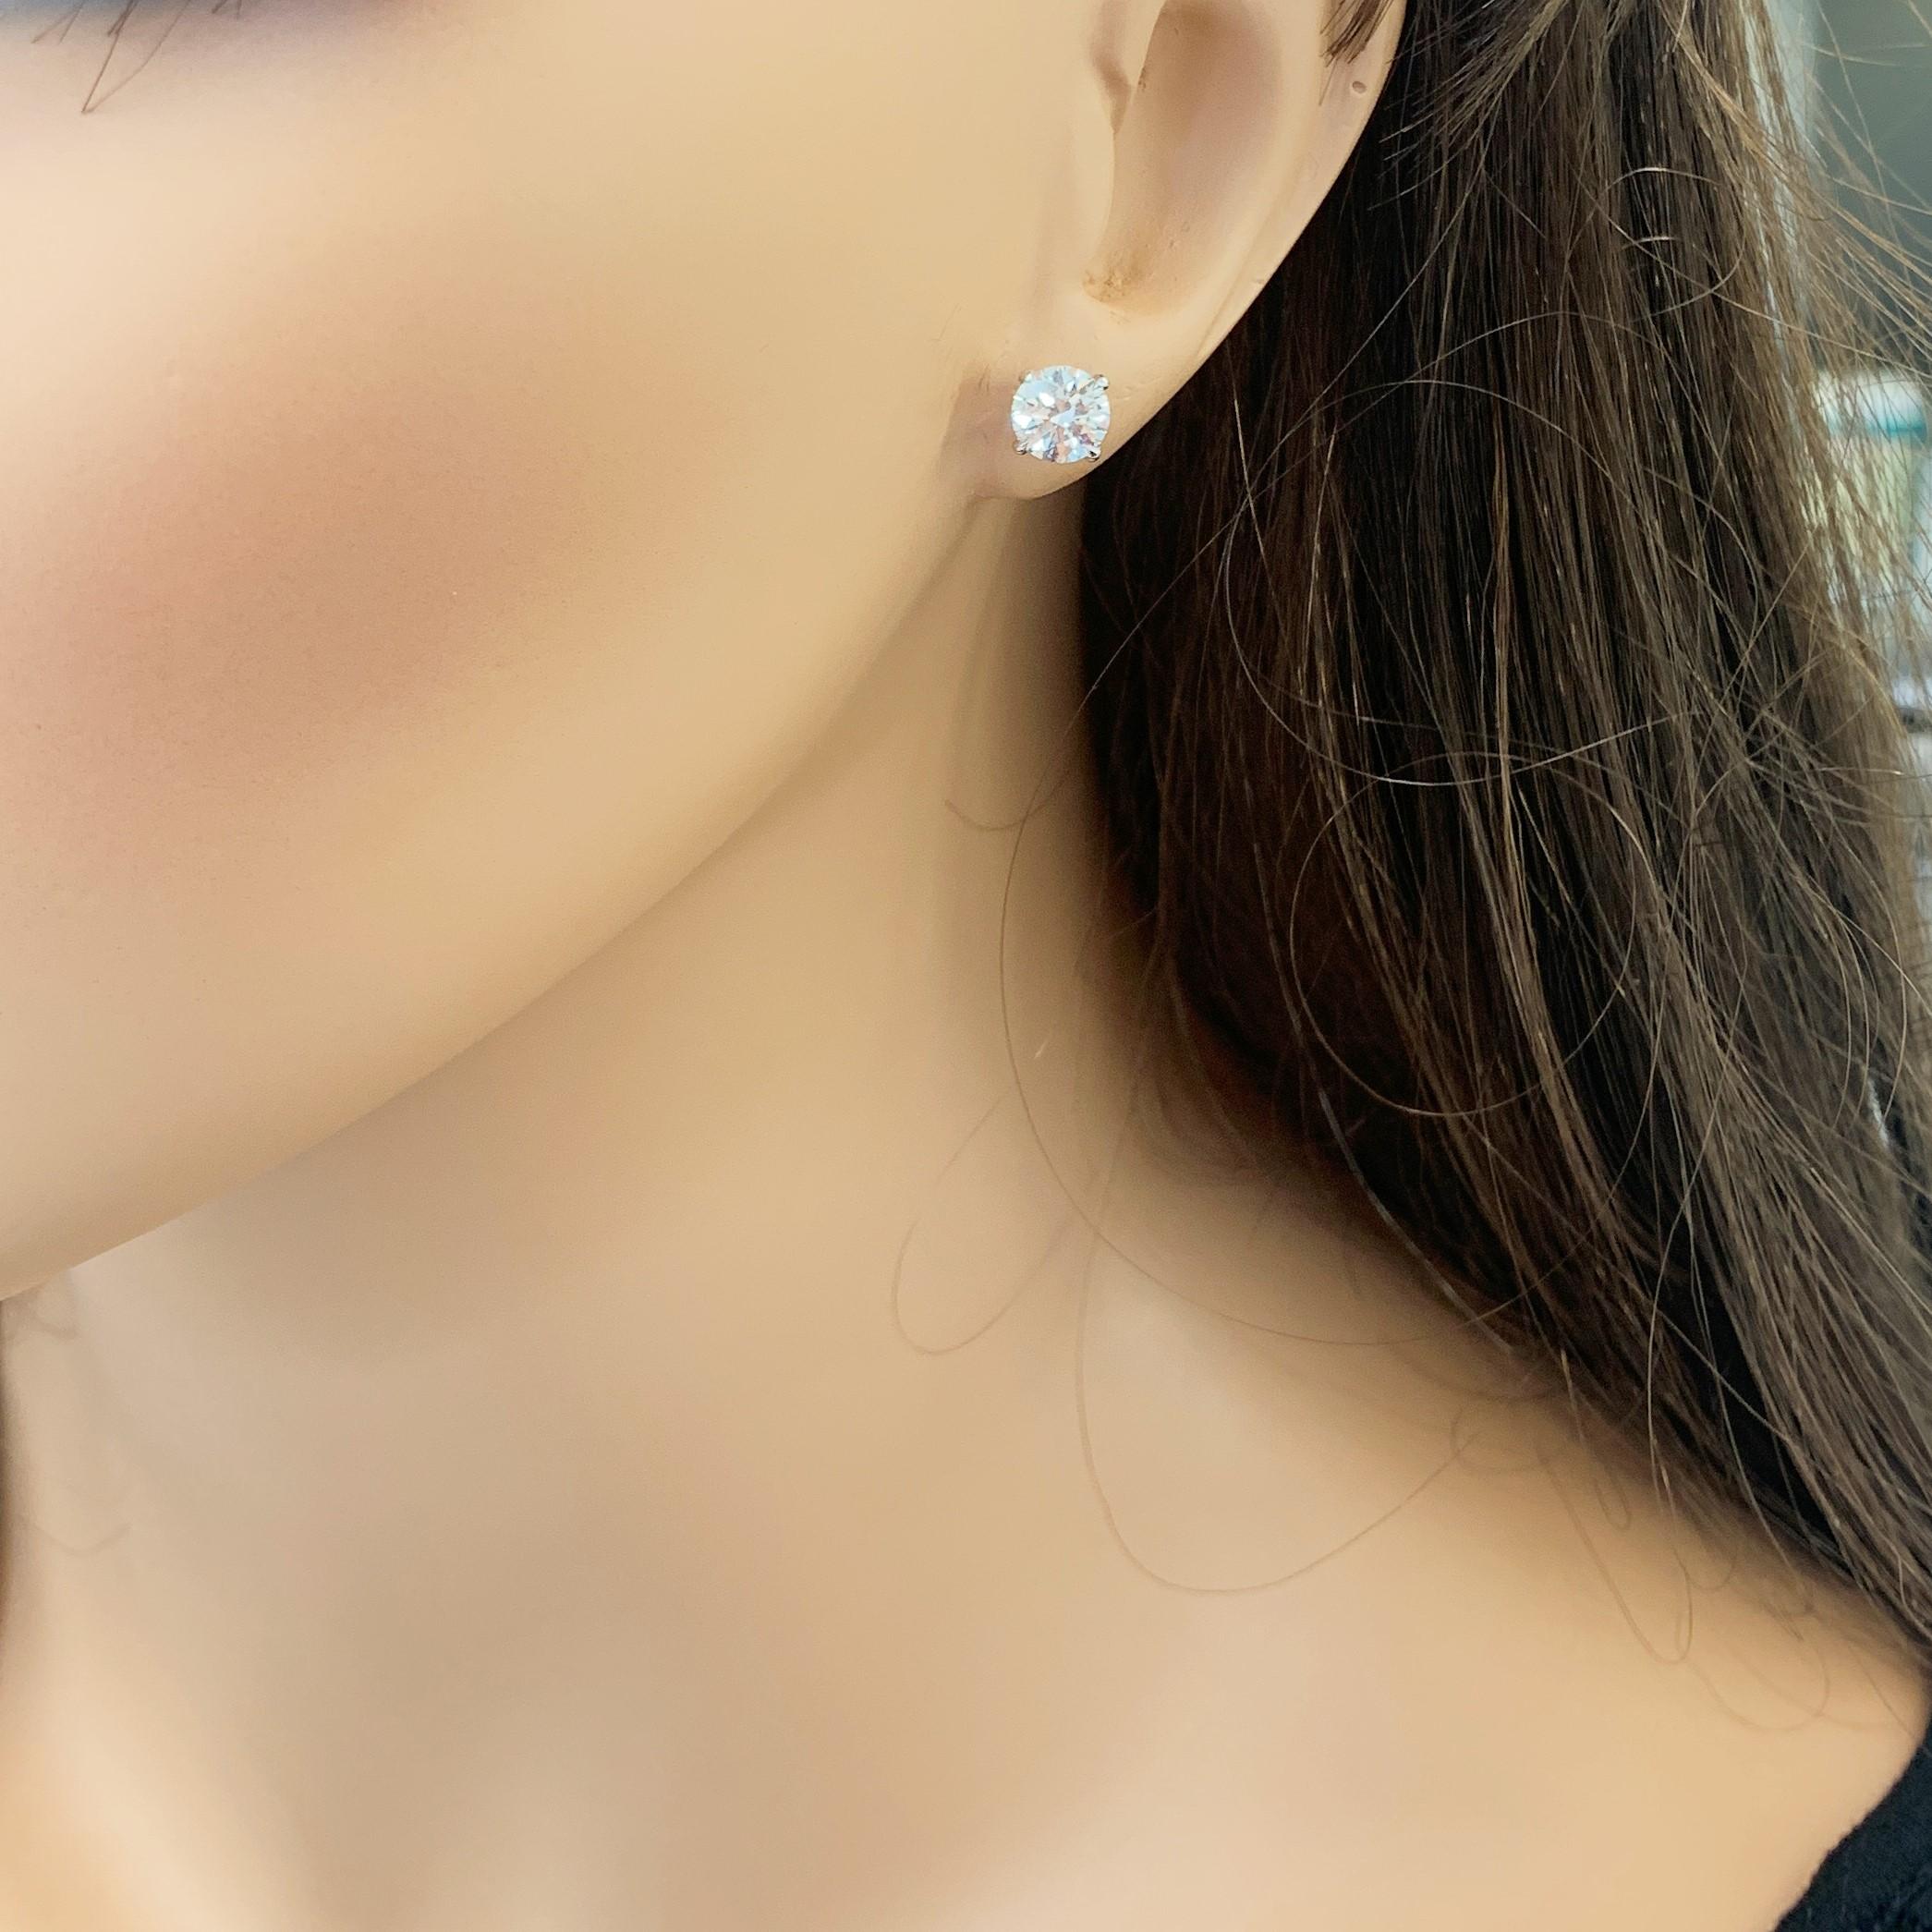 Stunning 14 Karat white gold handmade earrings featuring 2 round brilliant cut diamonds weighing 2.01 carat total J color VS2 clarity. The stunning earrings measure 6.25 - 6.31 mm in diameter, these gorgeous earrings are classic and timelessly